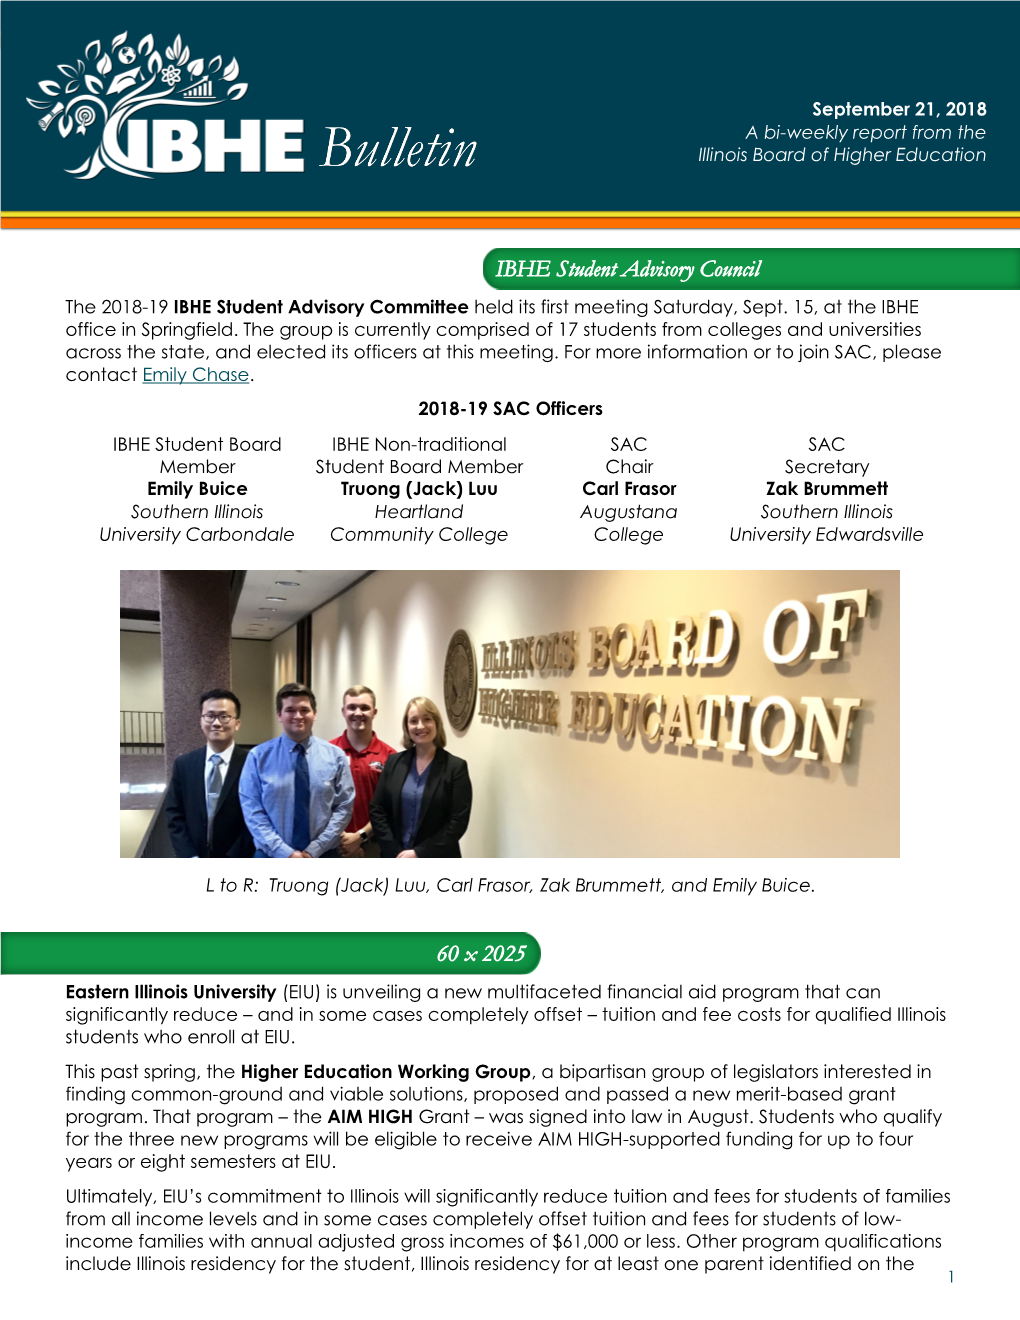 September 21, 2018 a Bi-Weekly Report from the Illinois Board of Higher Education the 2018-19 IBHE Student Advisory Committee He